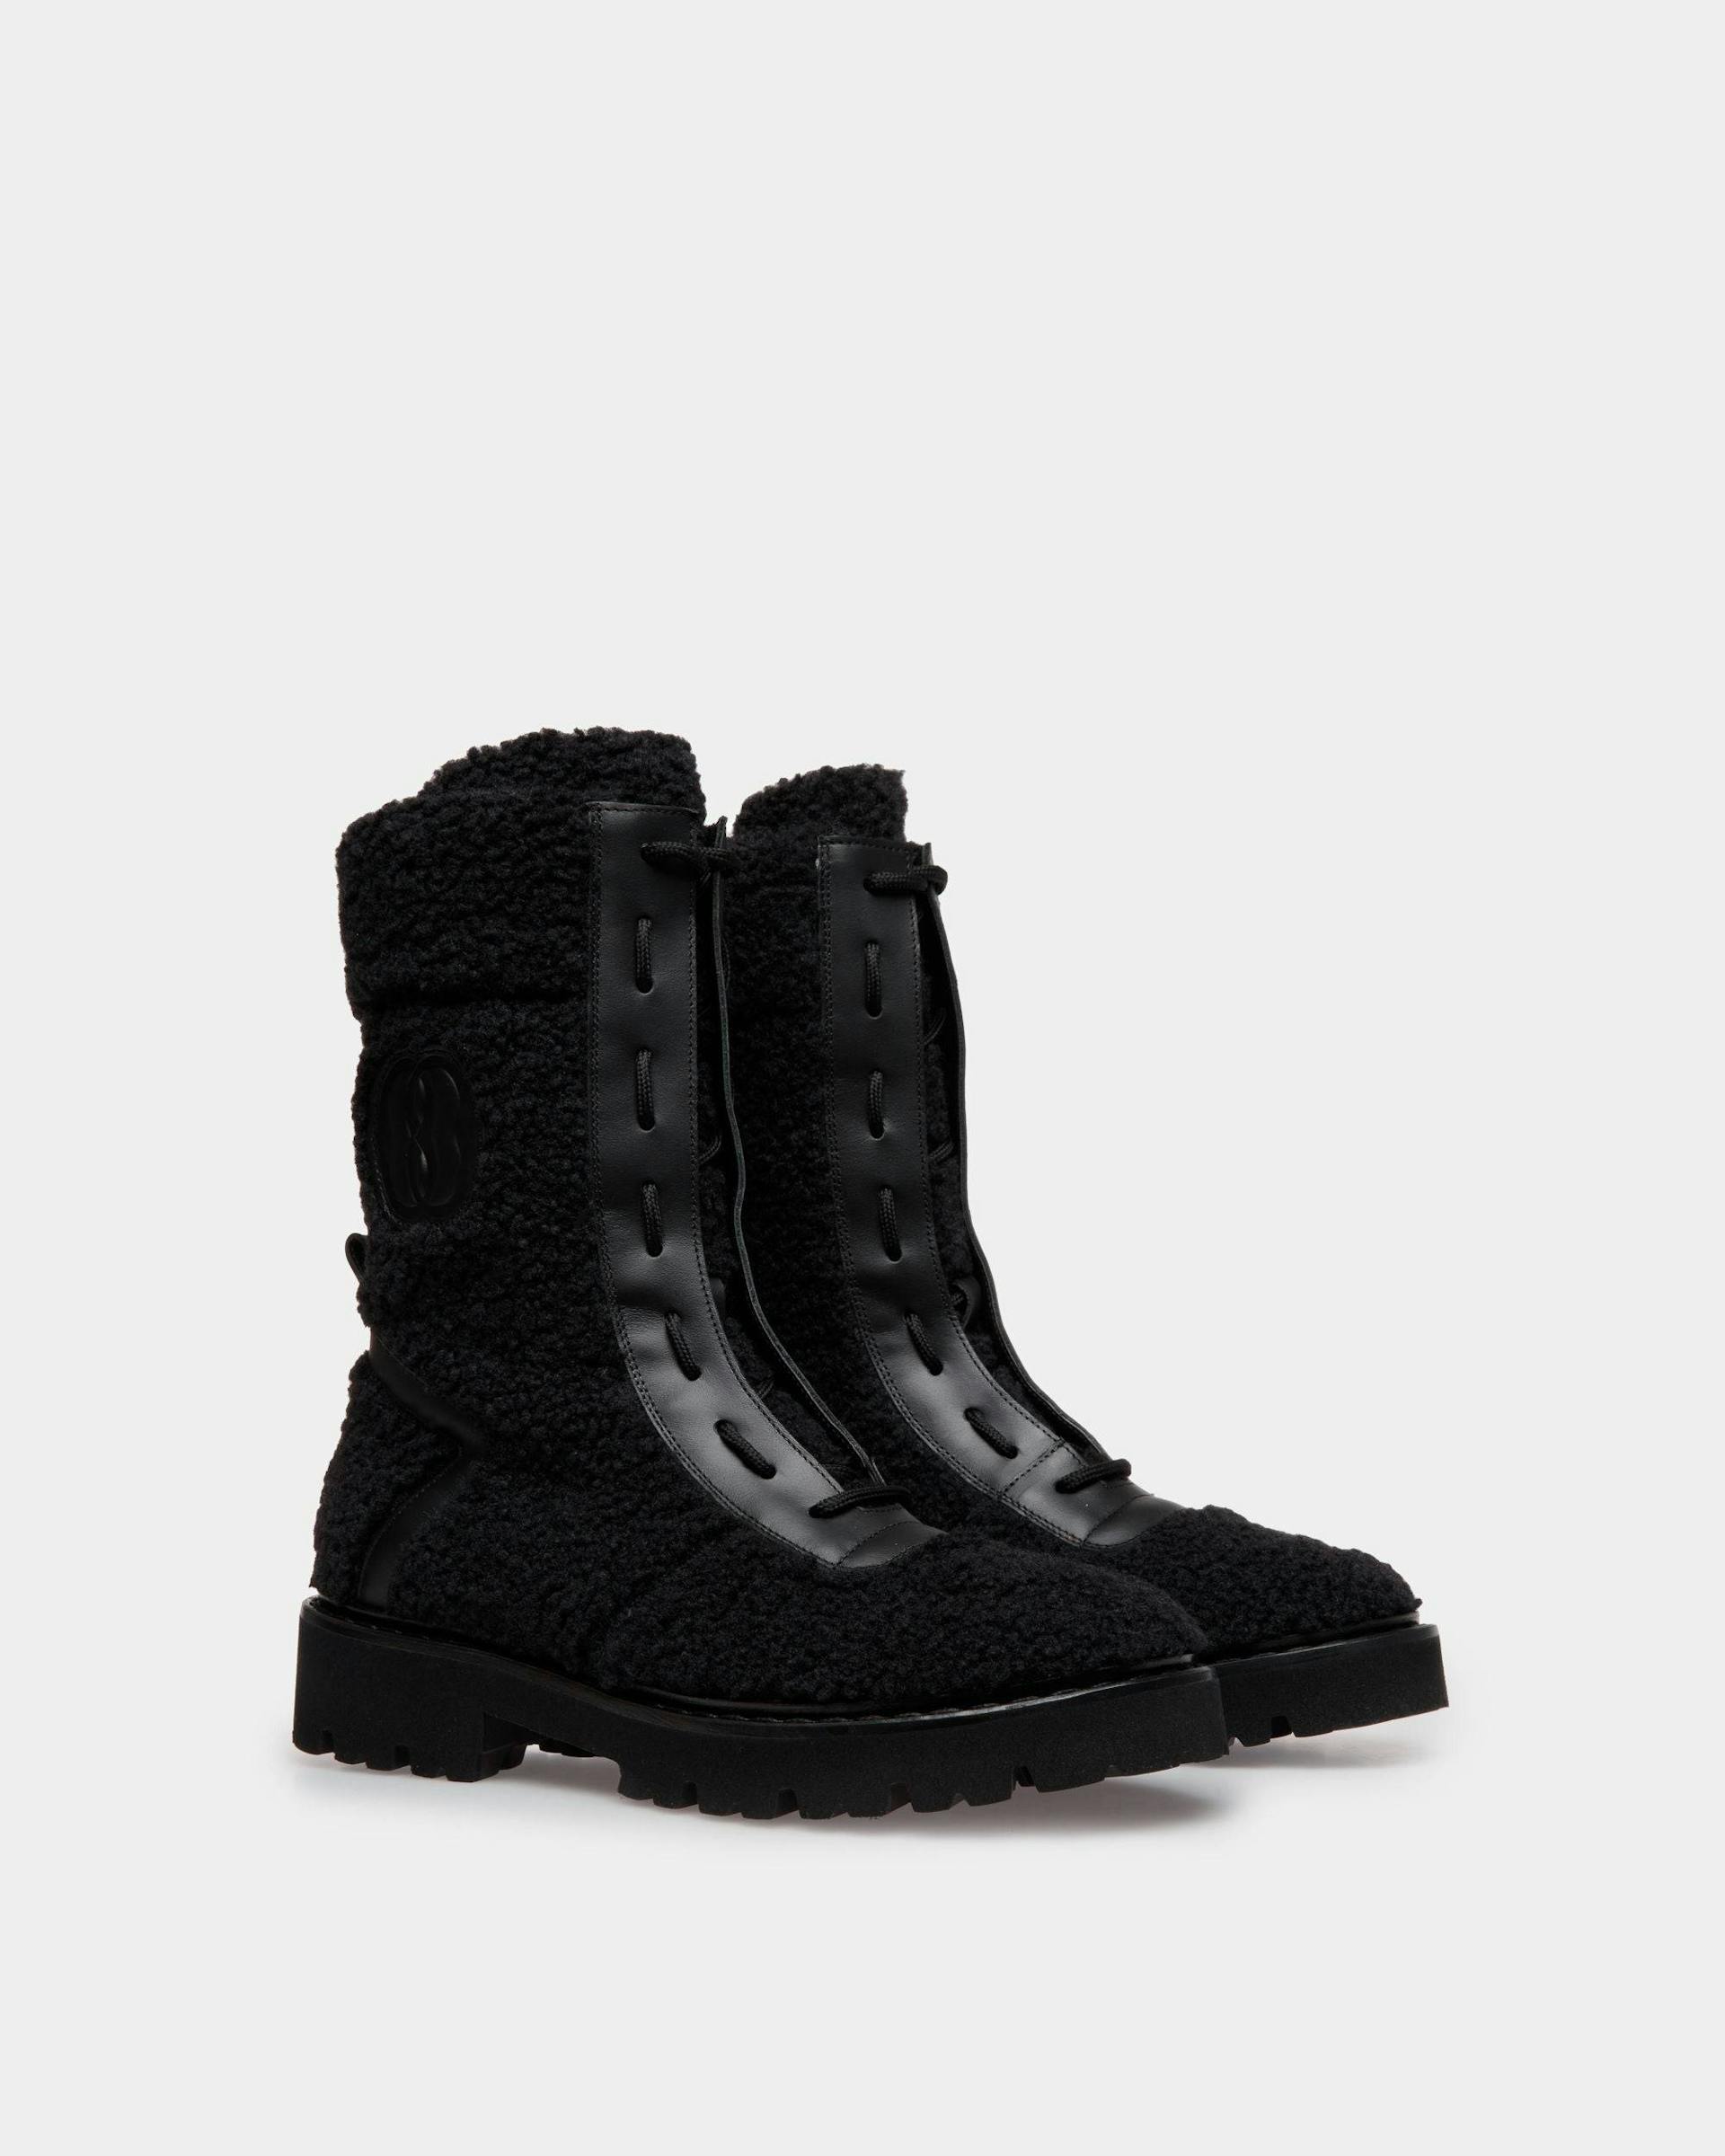 Women's Enga Boots In Black Leather | Bally | Still Life 3/4 Front